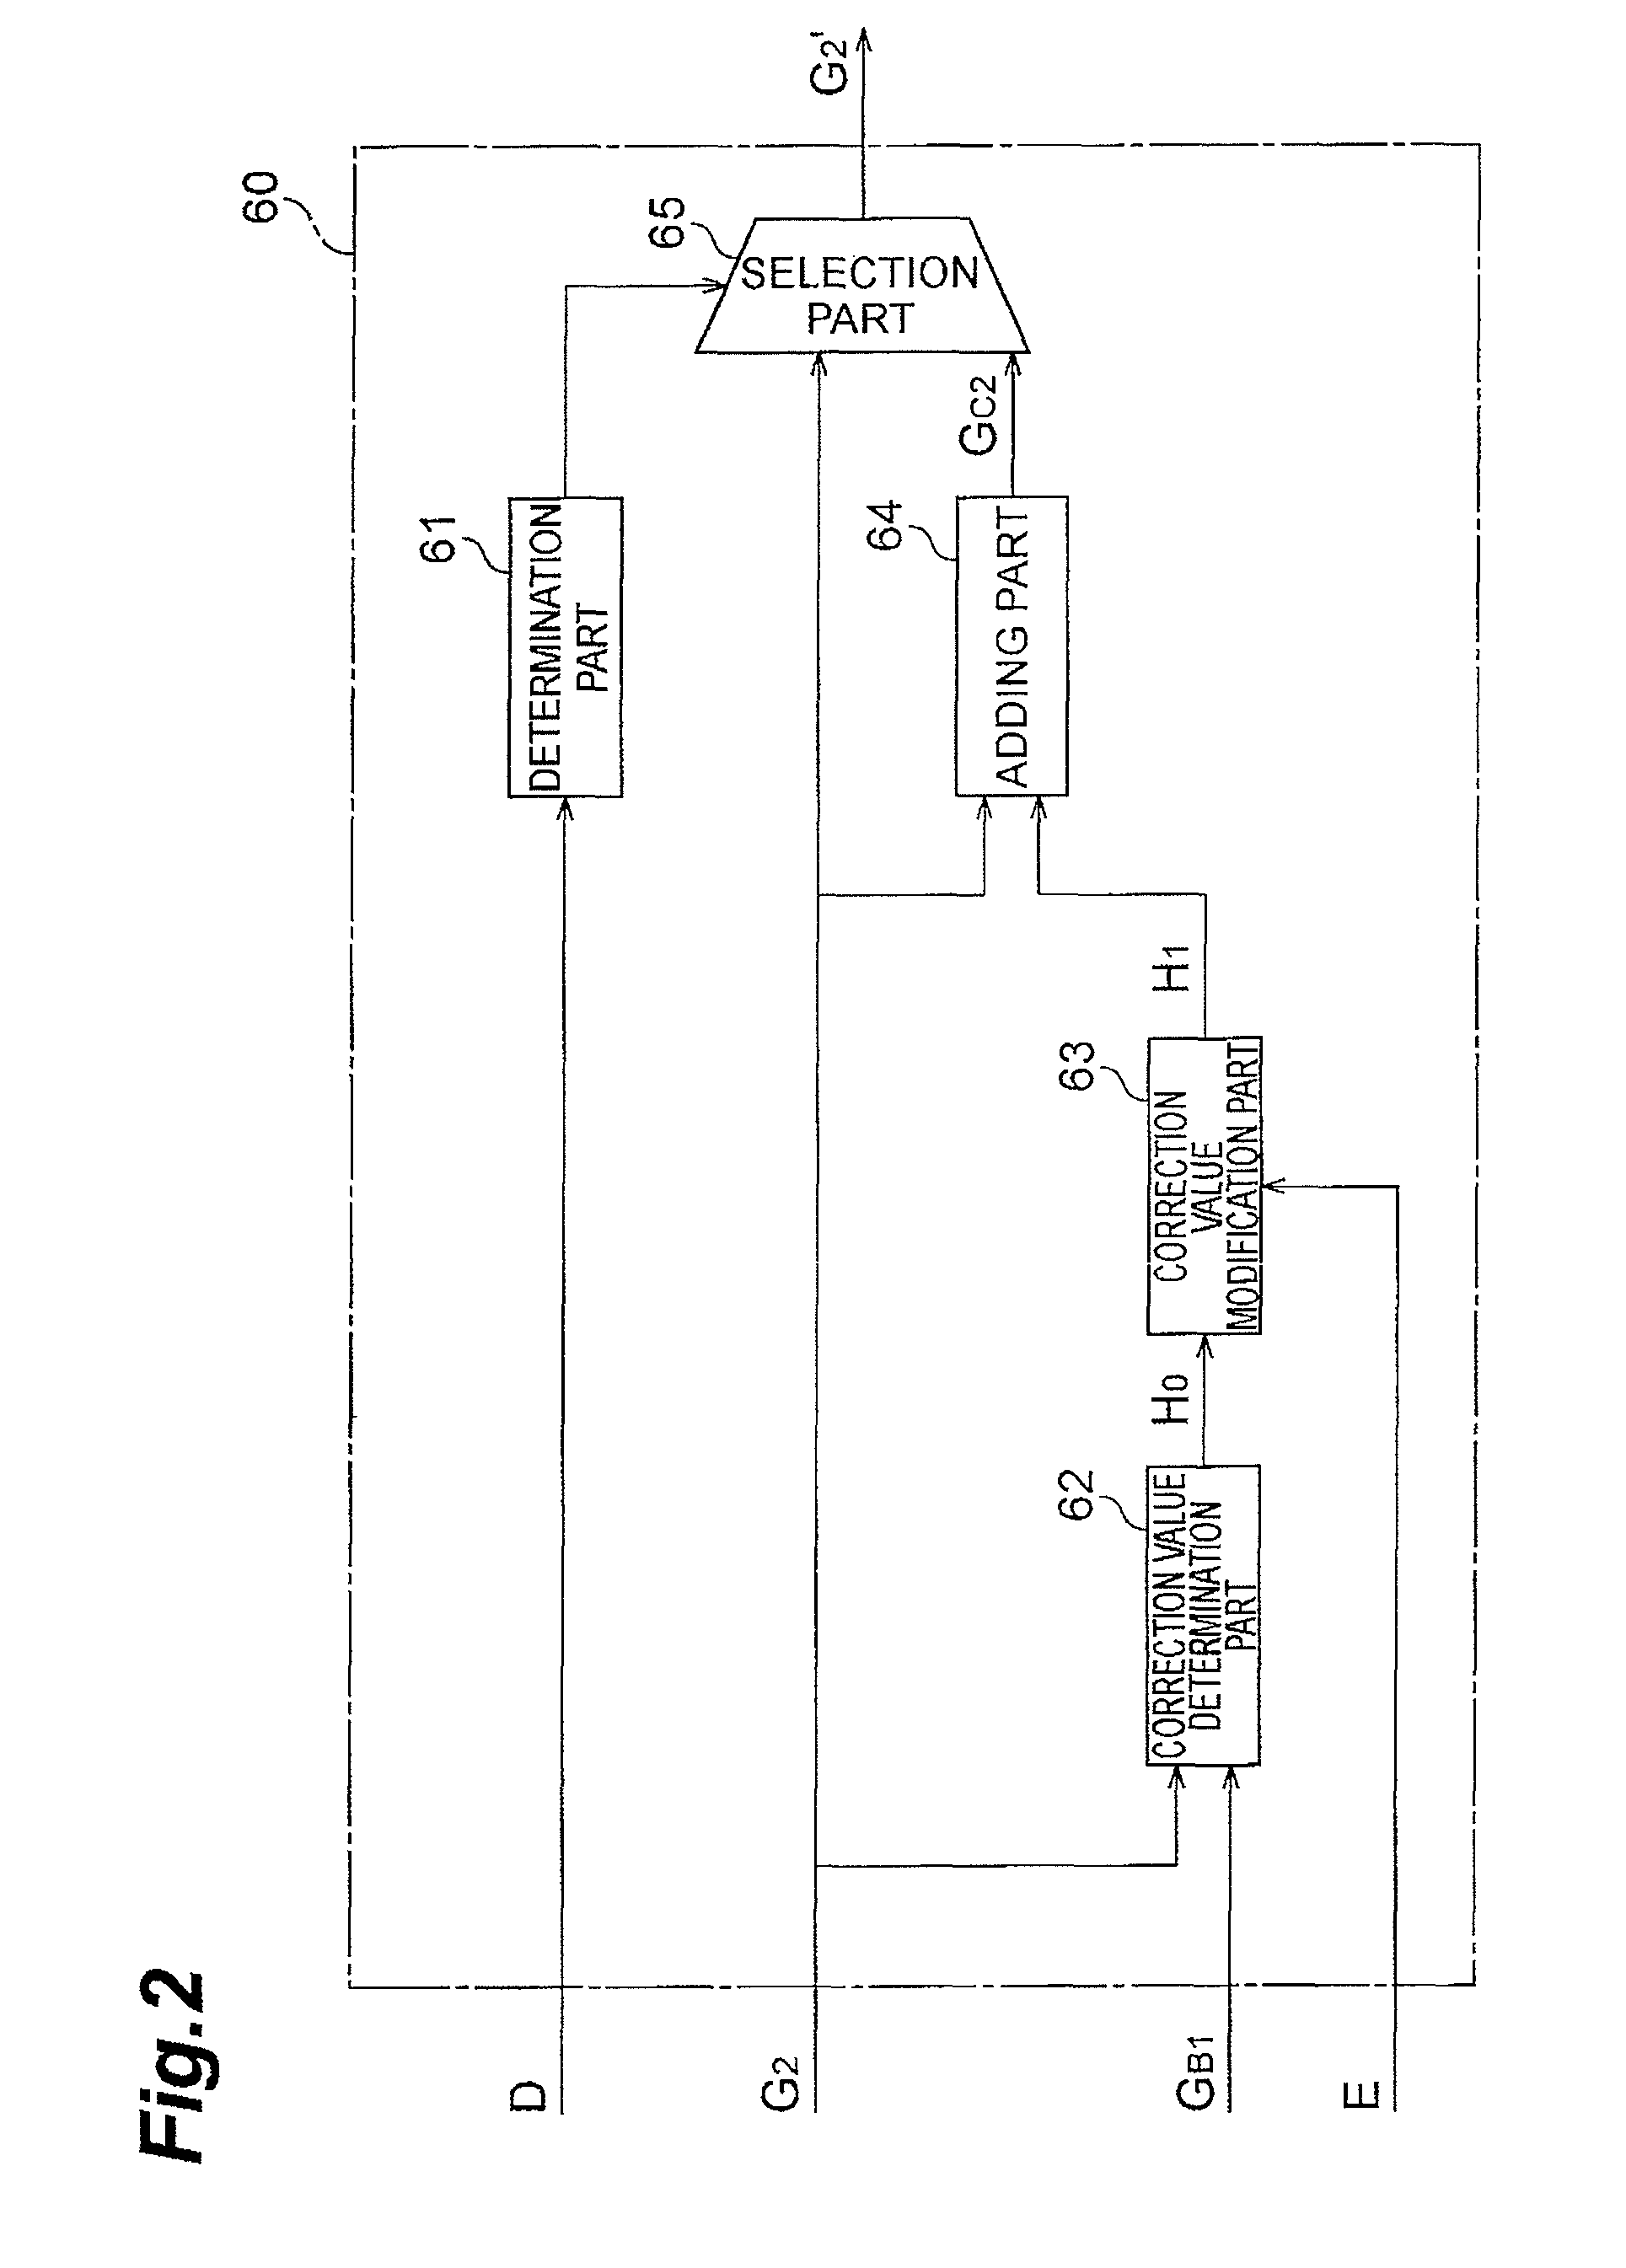 Image signal processing device